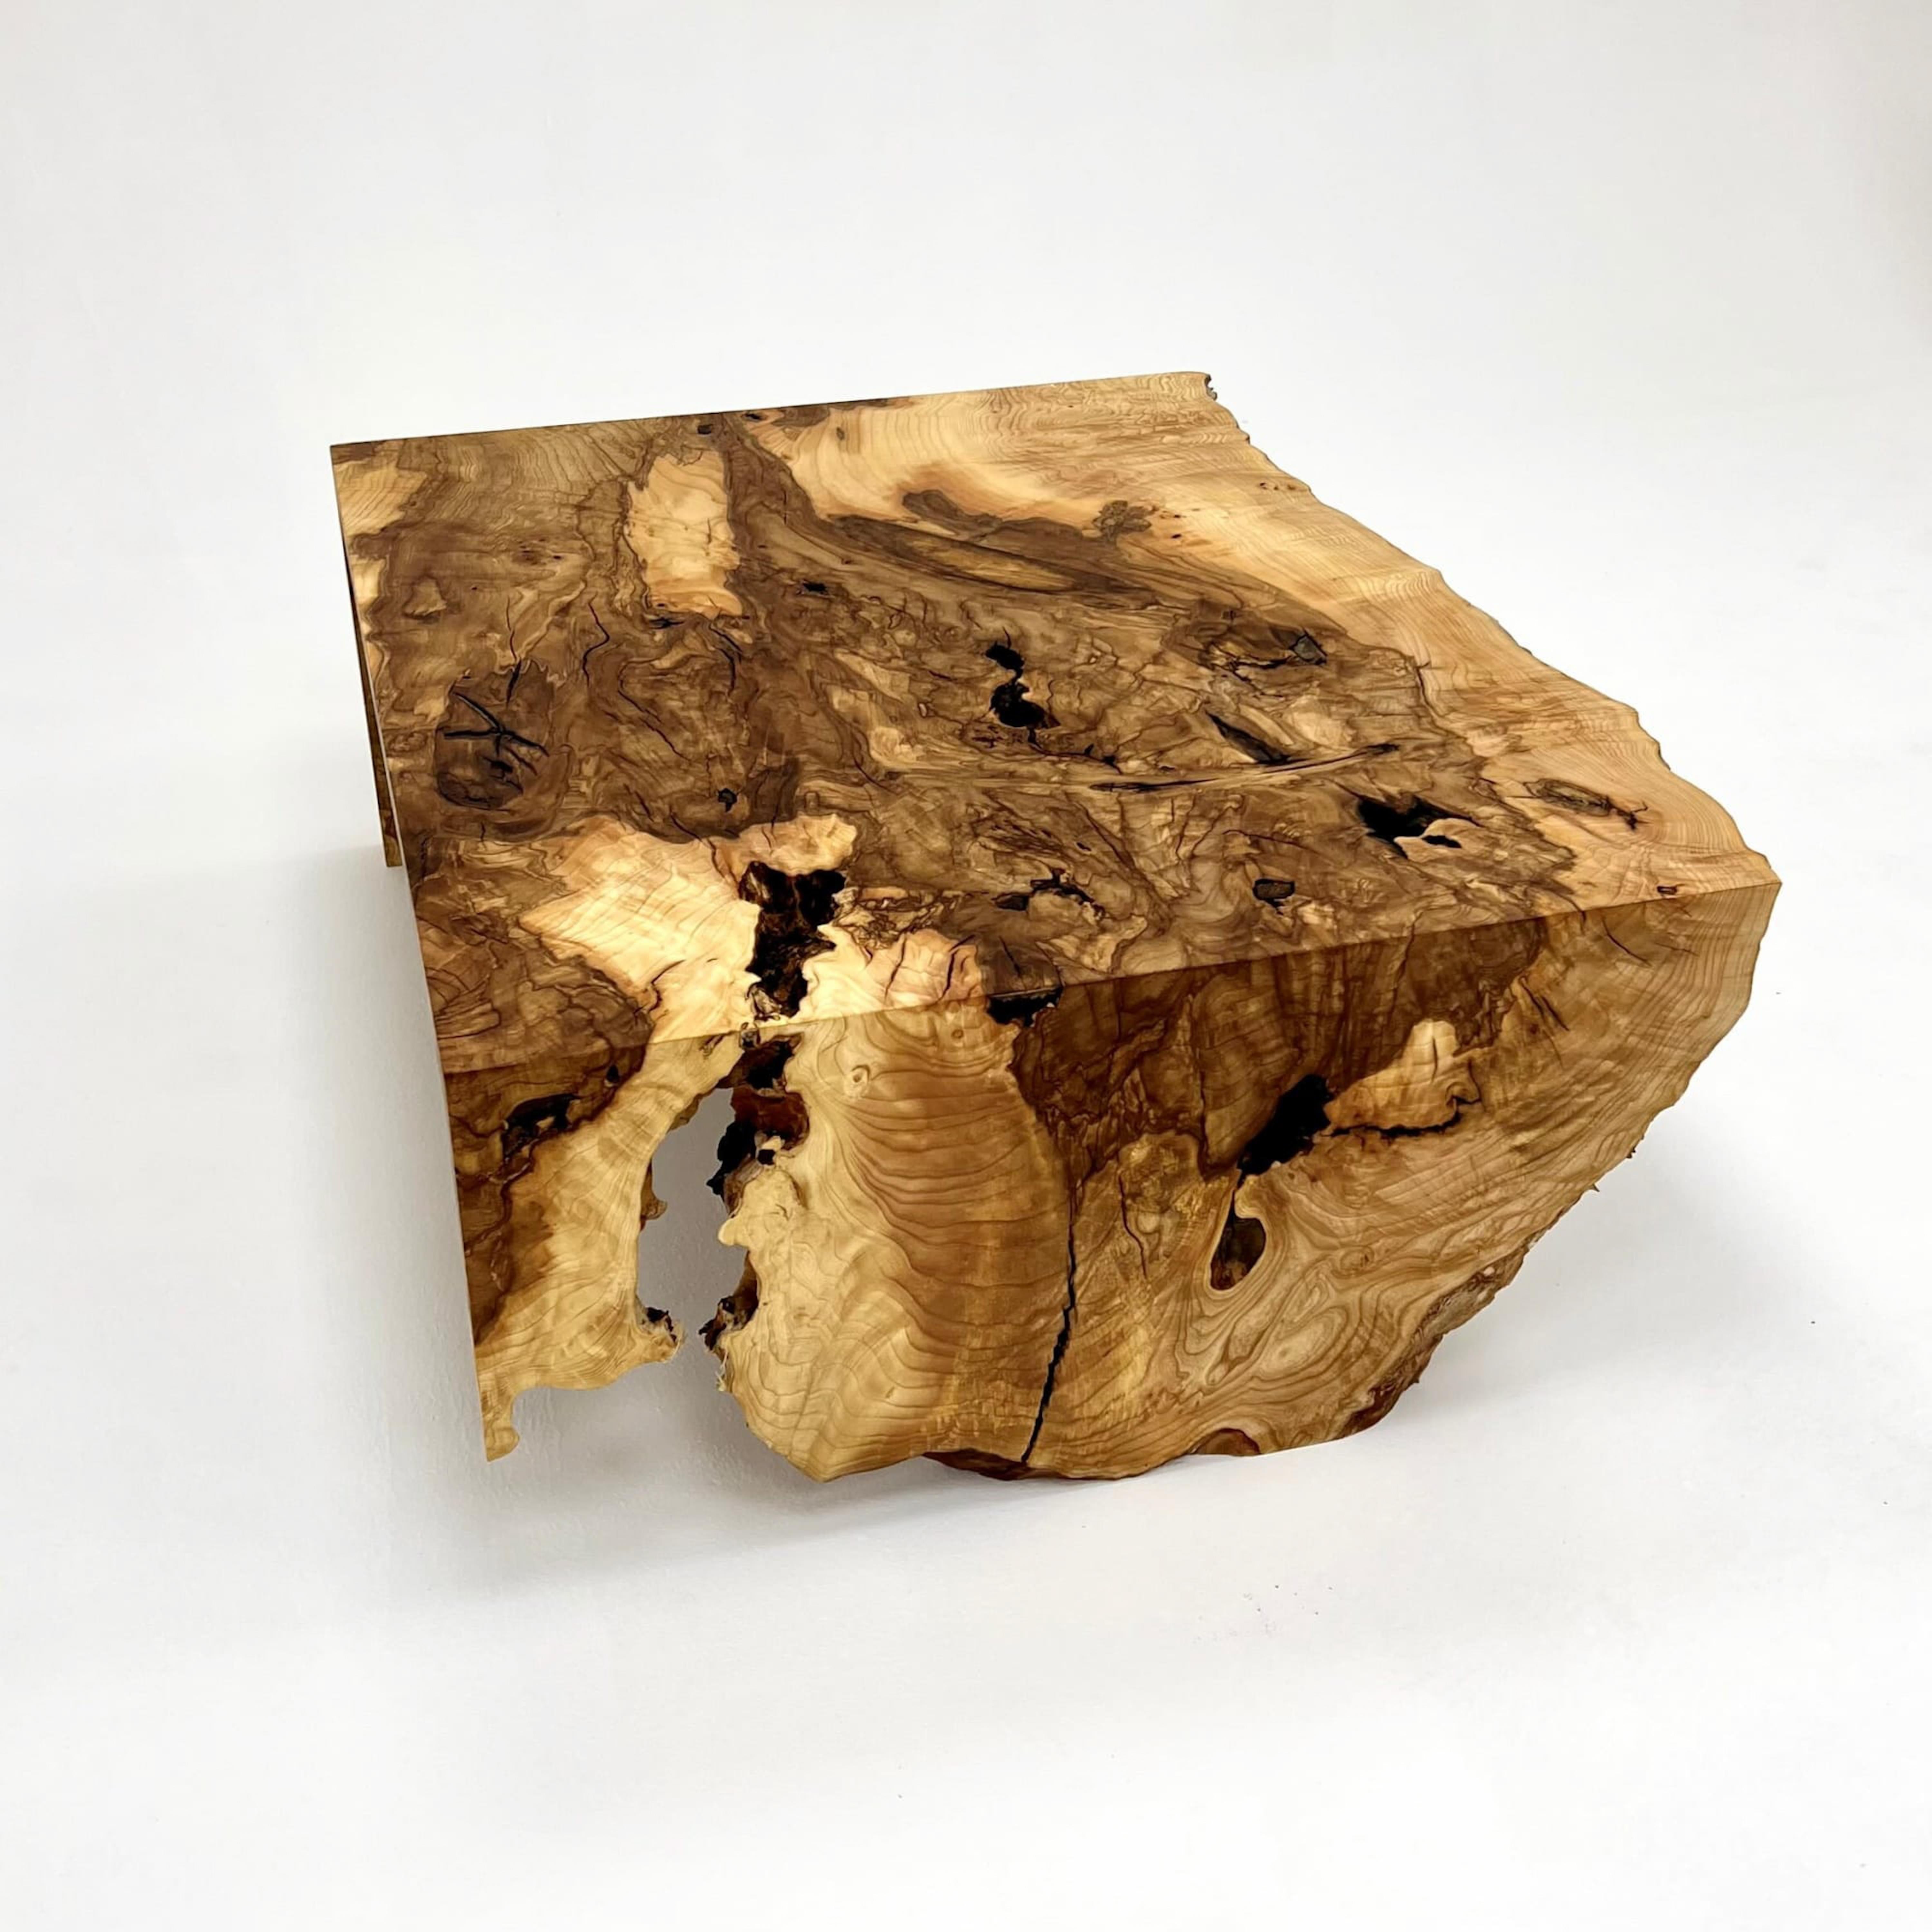 Ash Wood Coffee Table

Handcrafted by skilled artisans of Tinella Team, this coffee table seamlessly fuses natural wood with smoke epoxy resin, creating a captivating piece that captures nature's beauty. 
Its exceptional design and craftsmanship